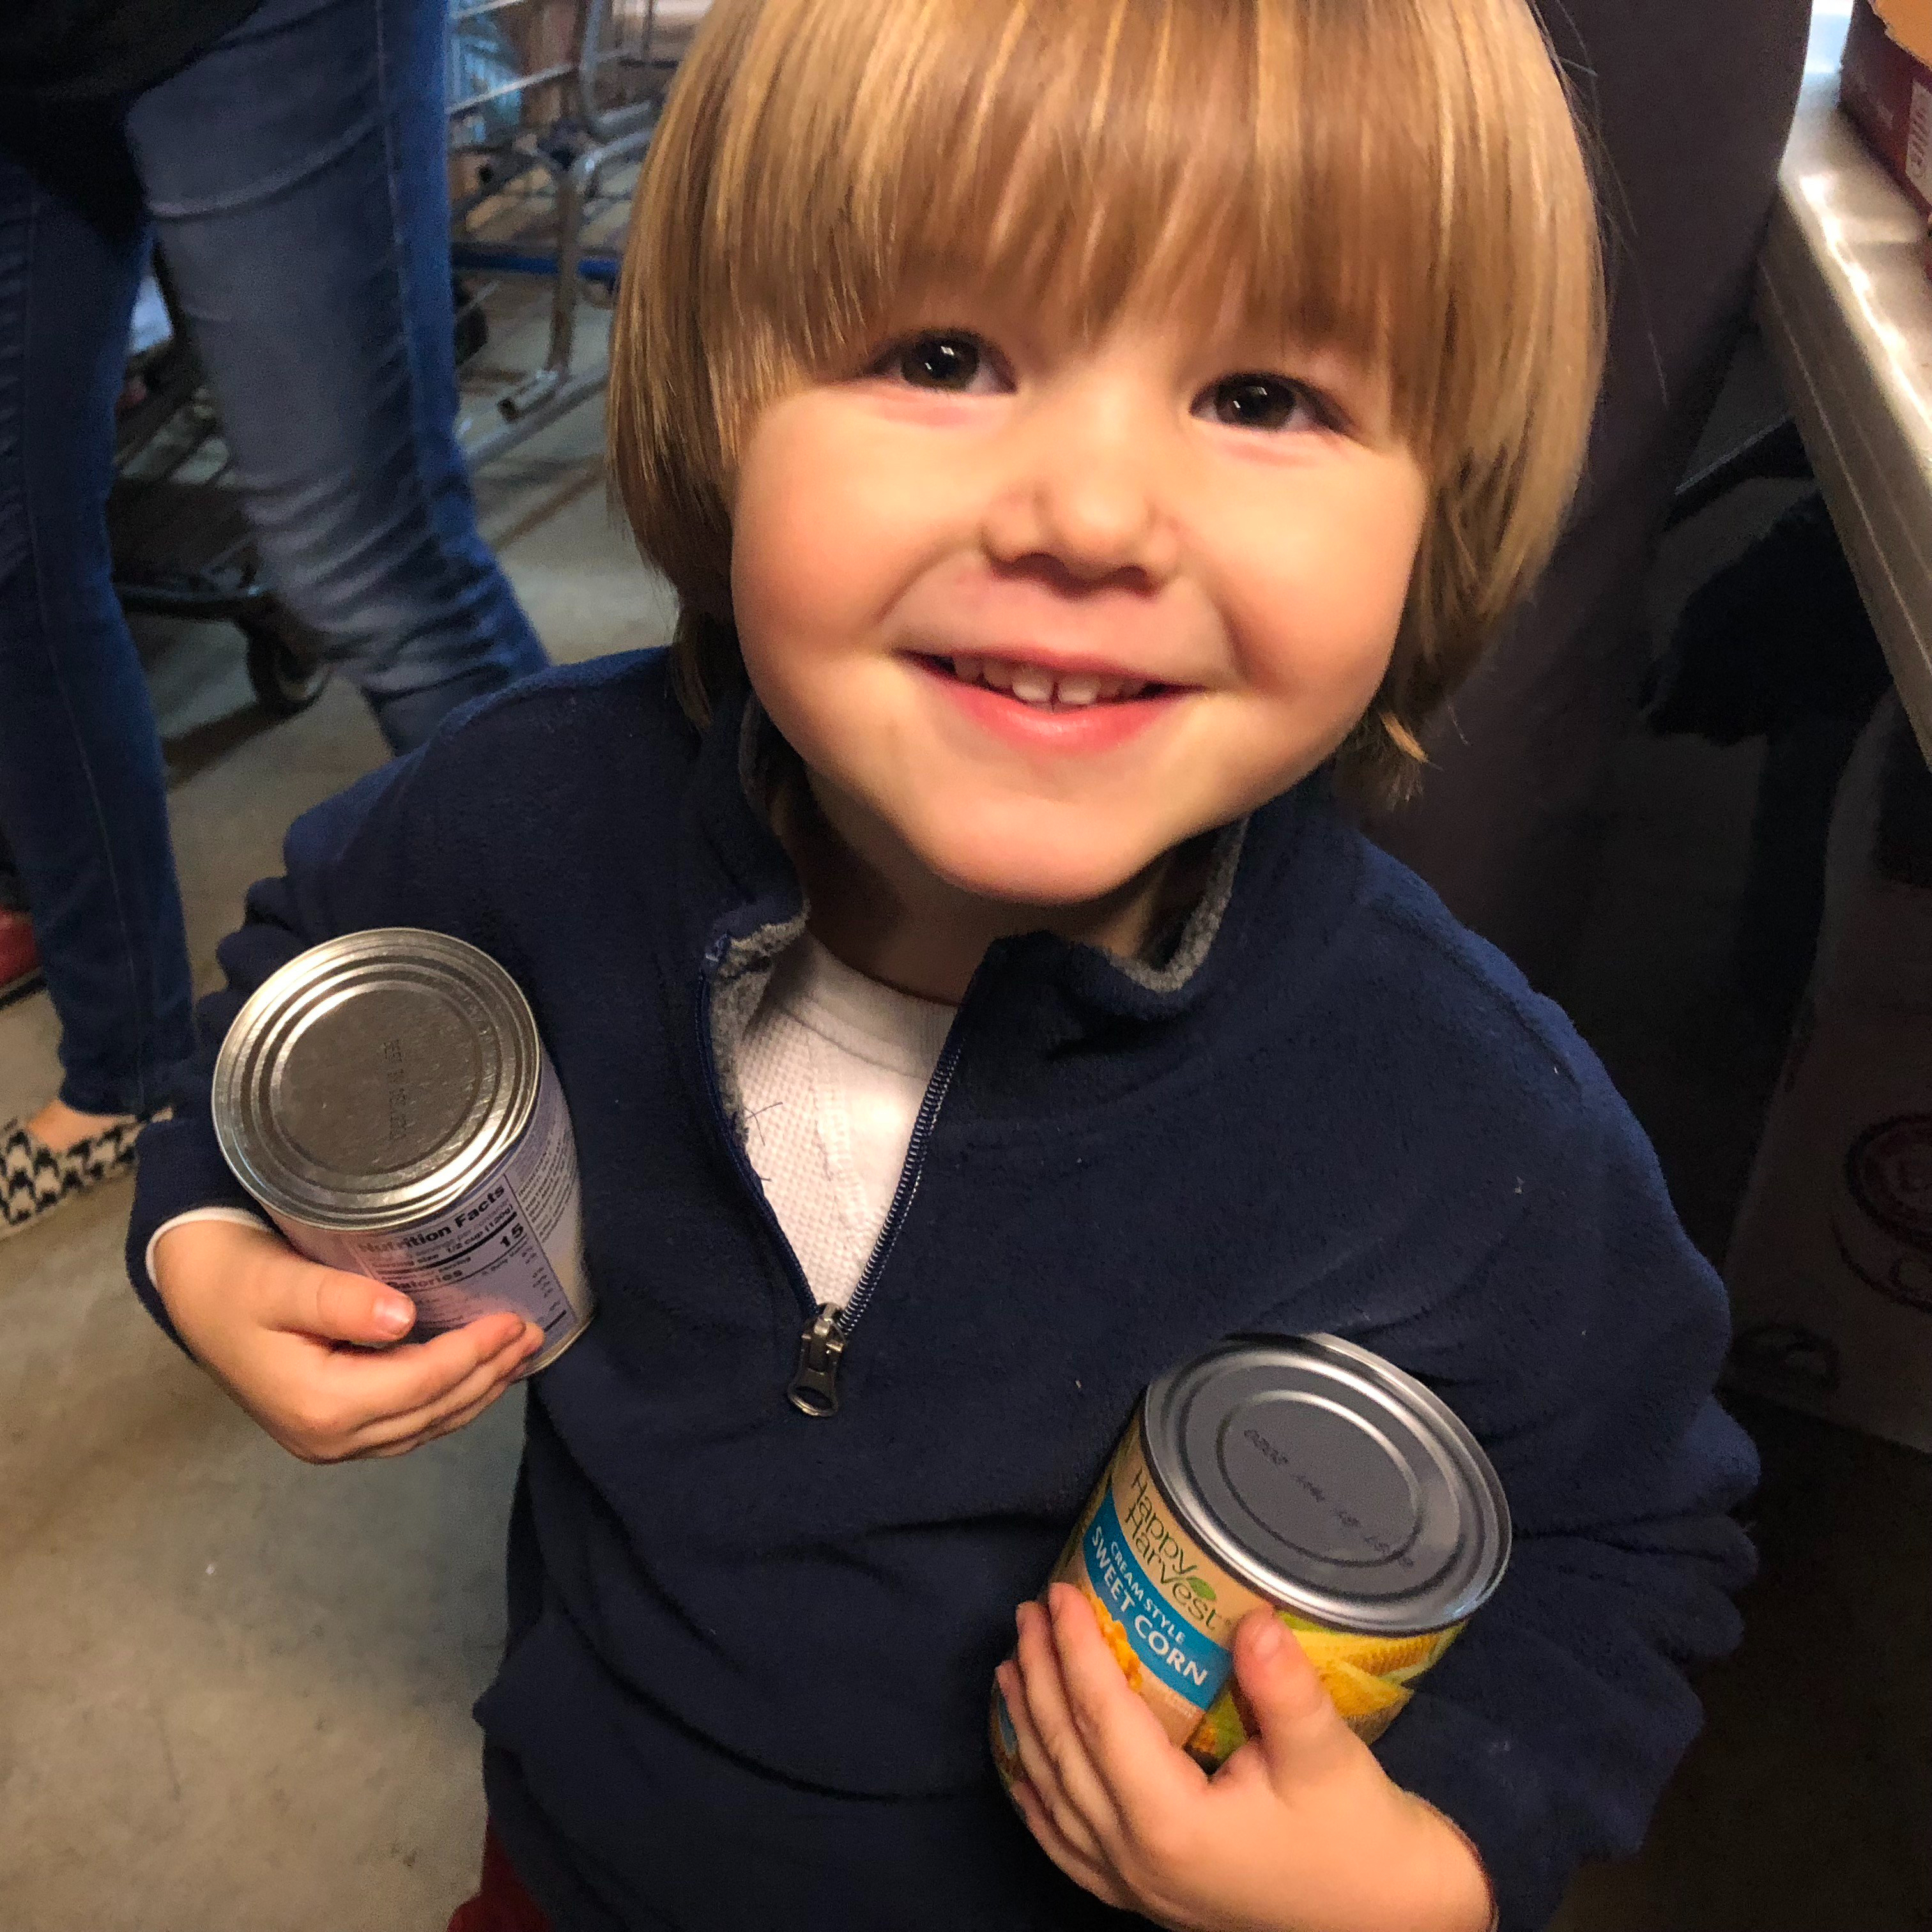 Our youngest son carrying cans in the church food pantry.